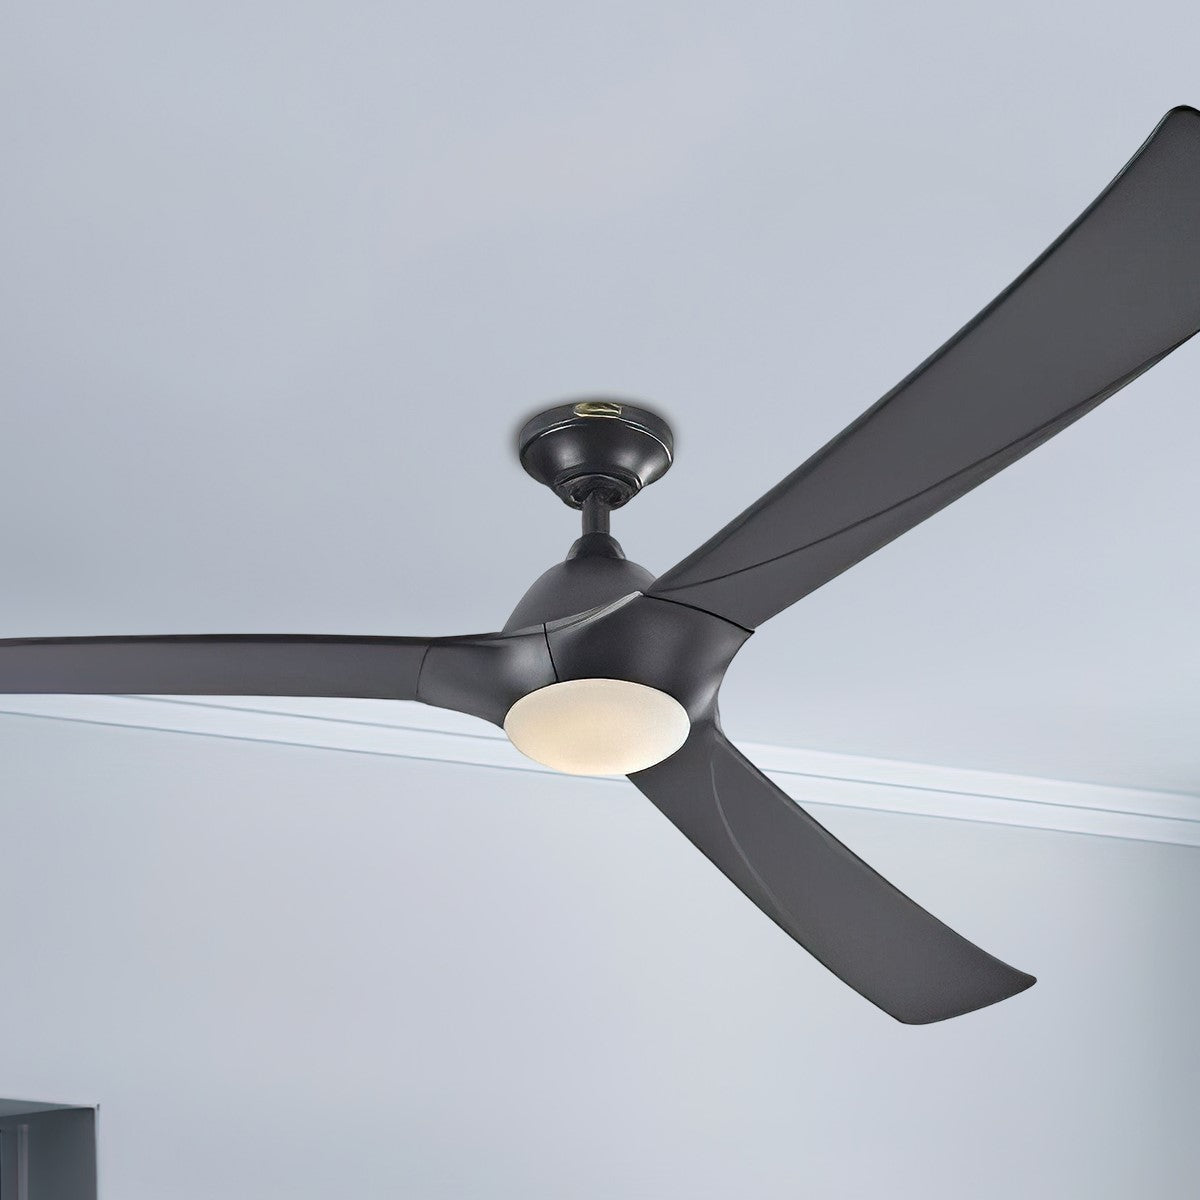 Techno II 72 Inch Large Modern Ceiling Fan With Light And Remote, Black Finish, DC Motor